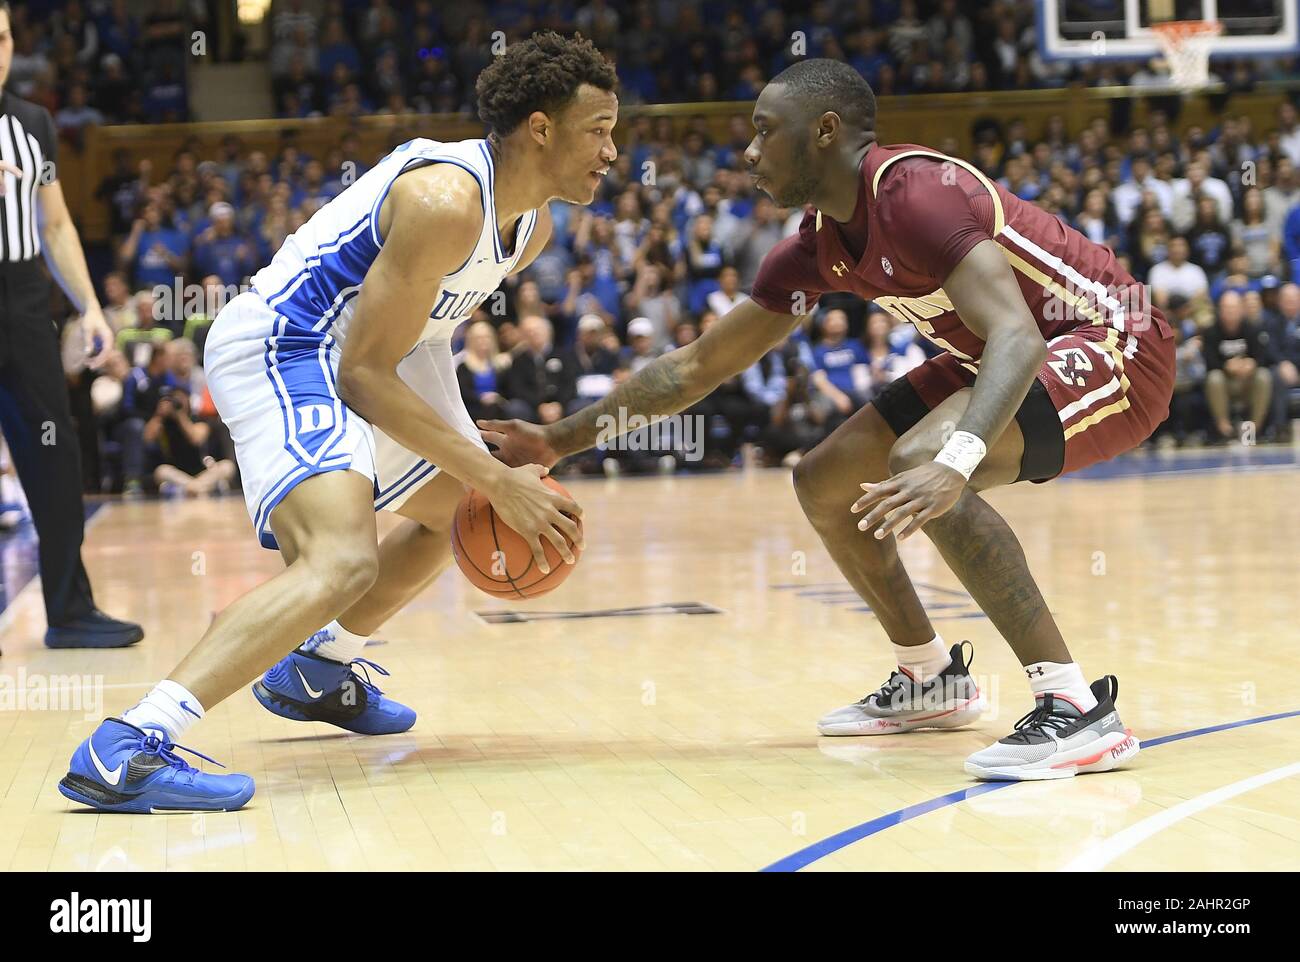 Durham, North Carolina, USA. 31st Dec, 2019. WENDELL MOORE JR., left, of Duke dribbles against JAY HEATH (5) of Boston College. The Duke Blue Devils hosted the Boston College Eagles at the Cameron Indoor Stadium in Durham, N.C. Credit: Fabian Radulescu/ZUMA Wire/Alamy Live News Stock Photo